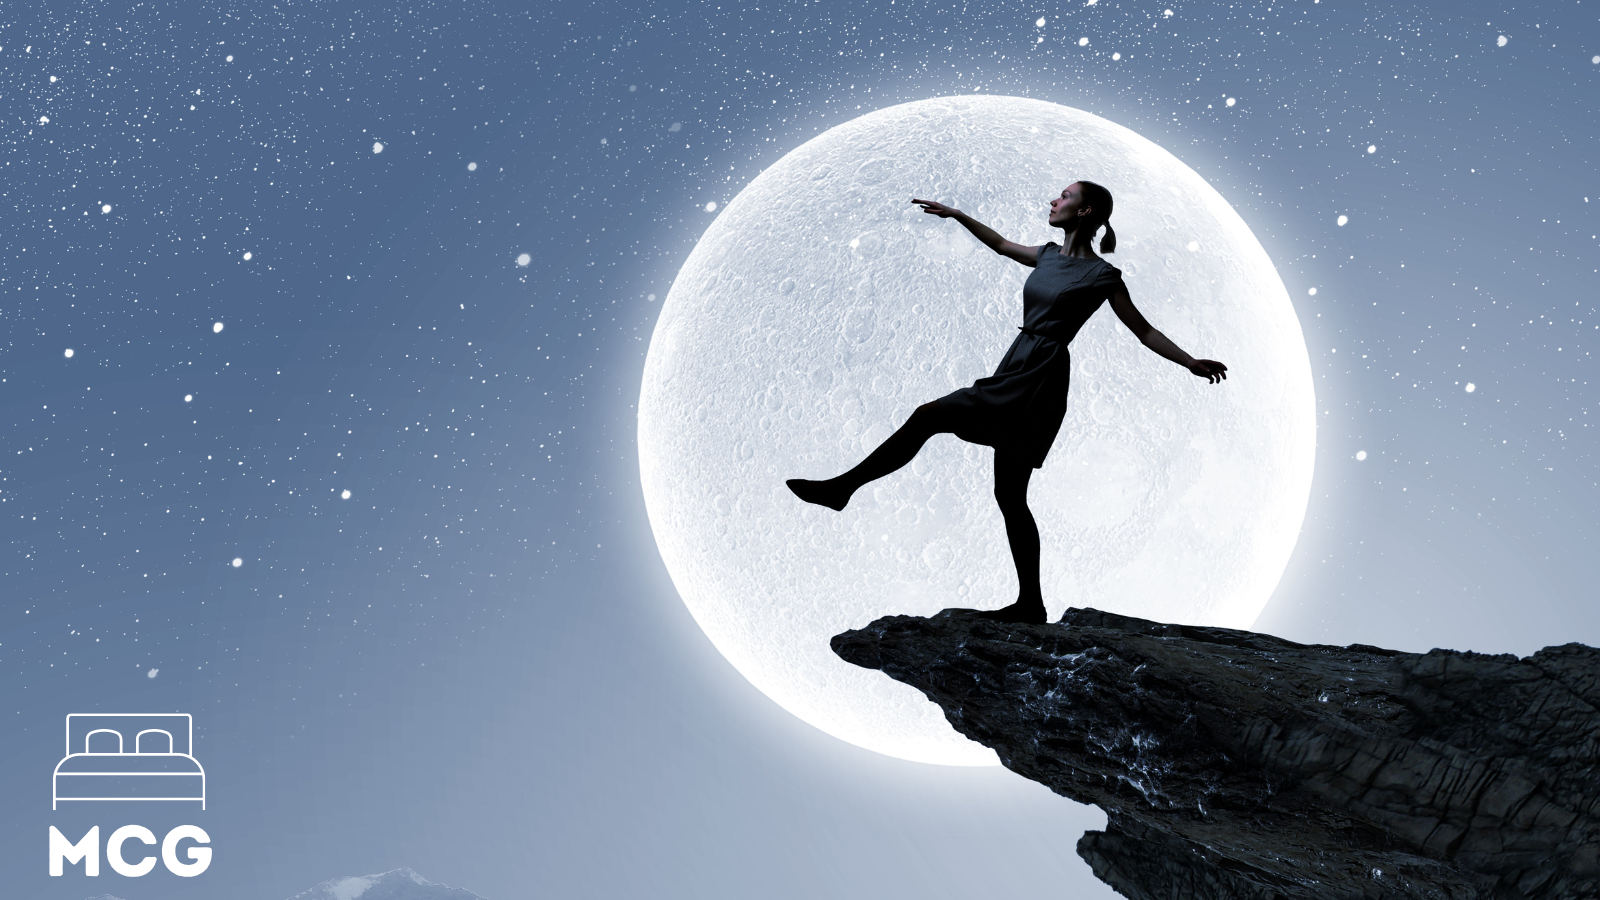 sleep walking image with a woman and a full moon